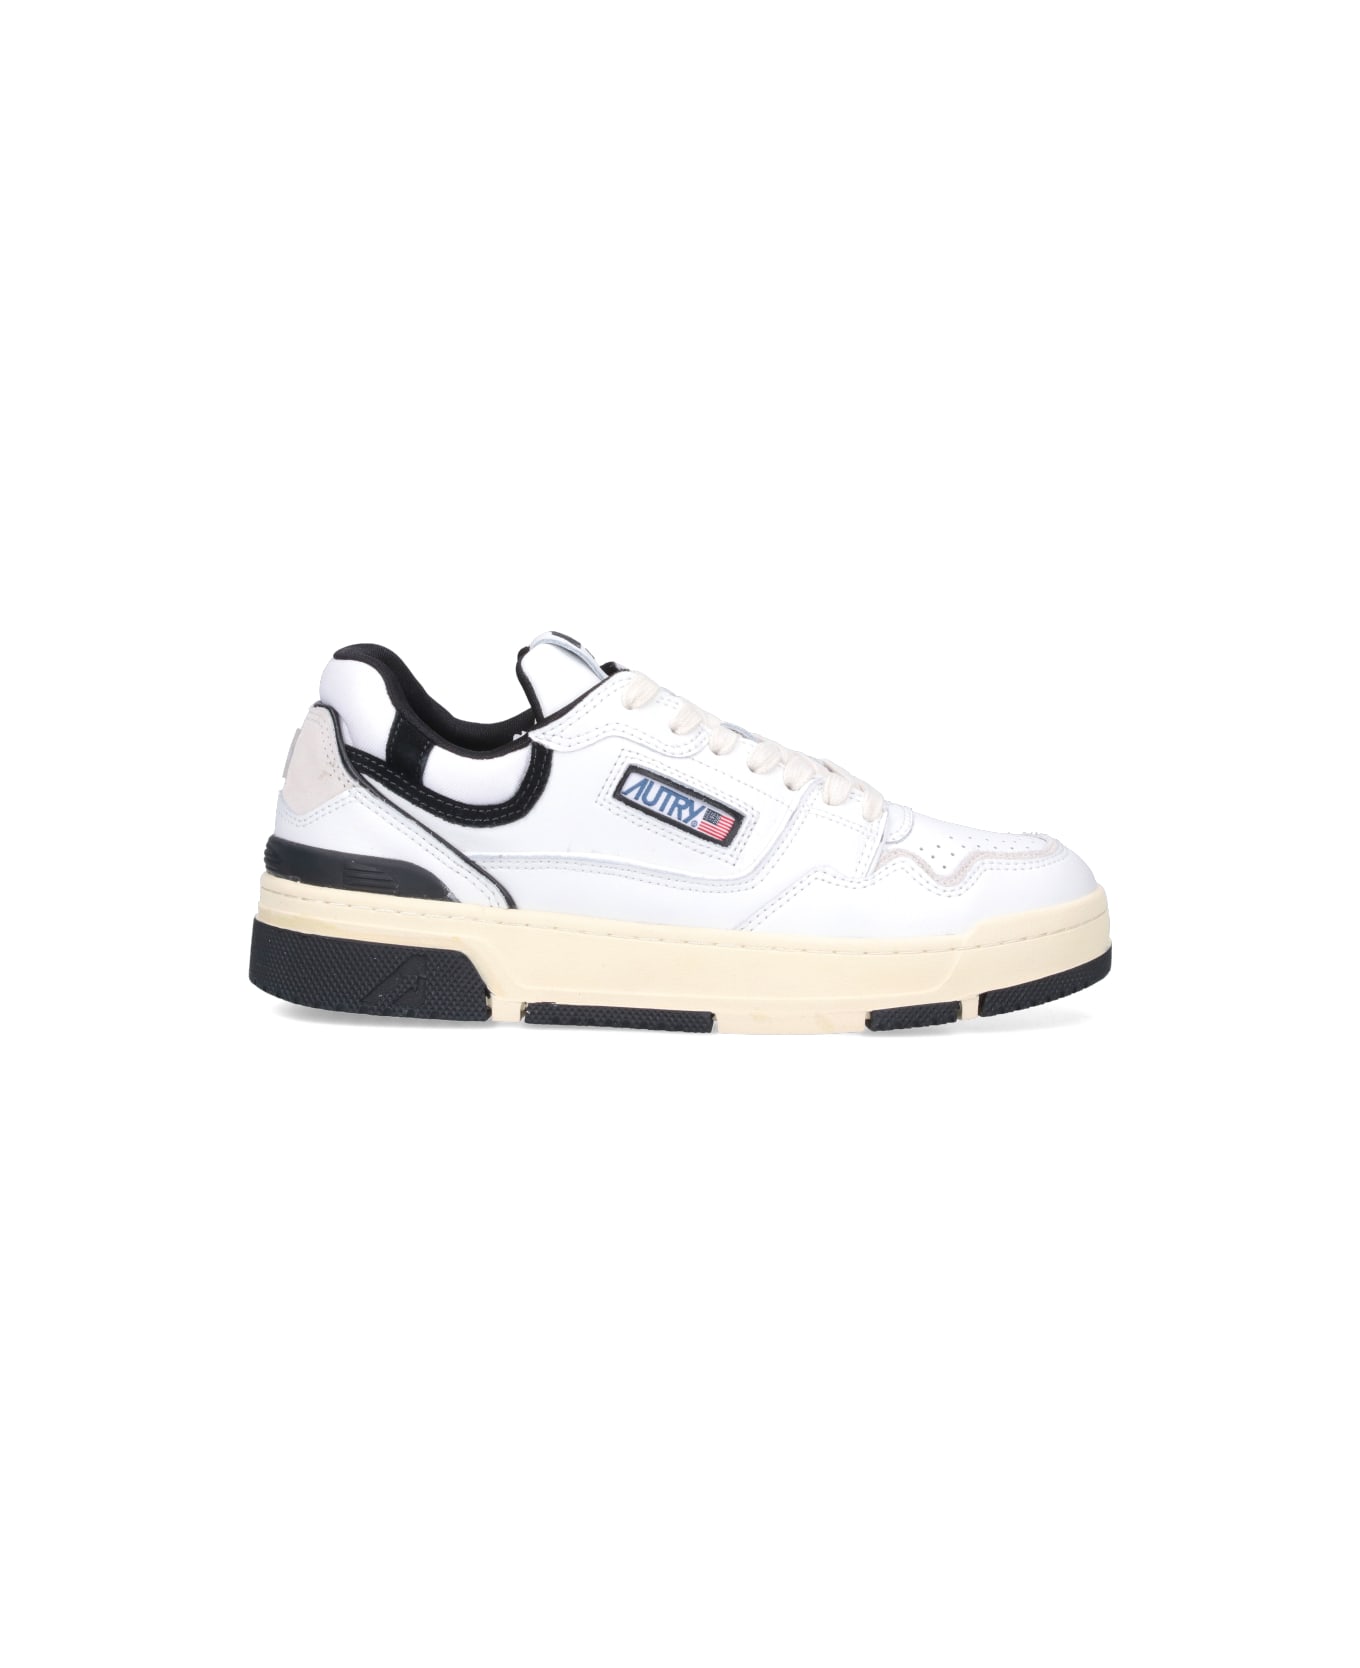 Autry Clc Sneakers In White And Black Leather - White/black